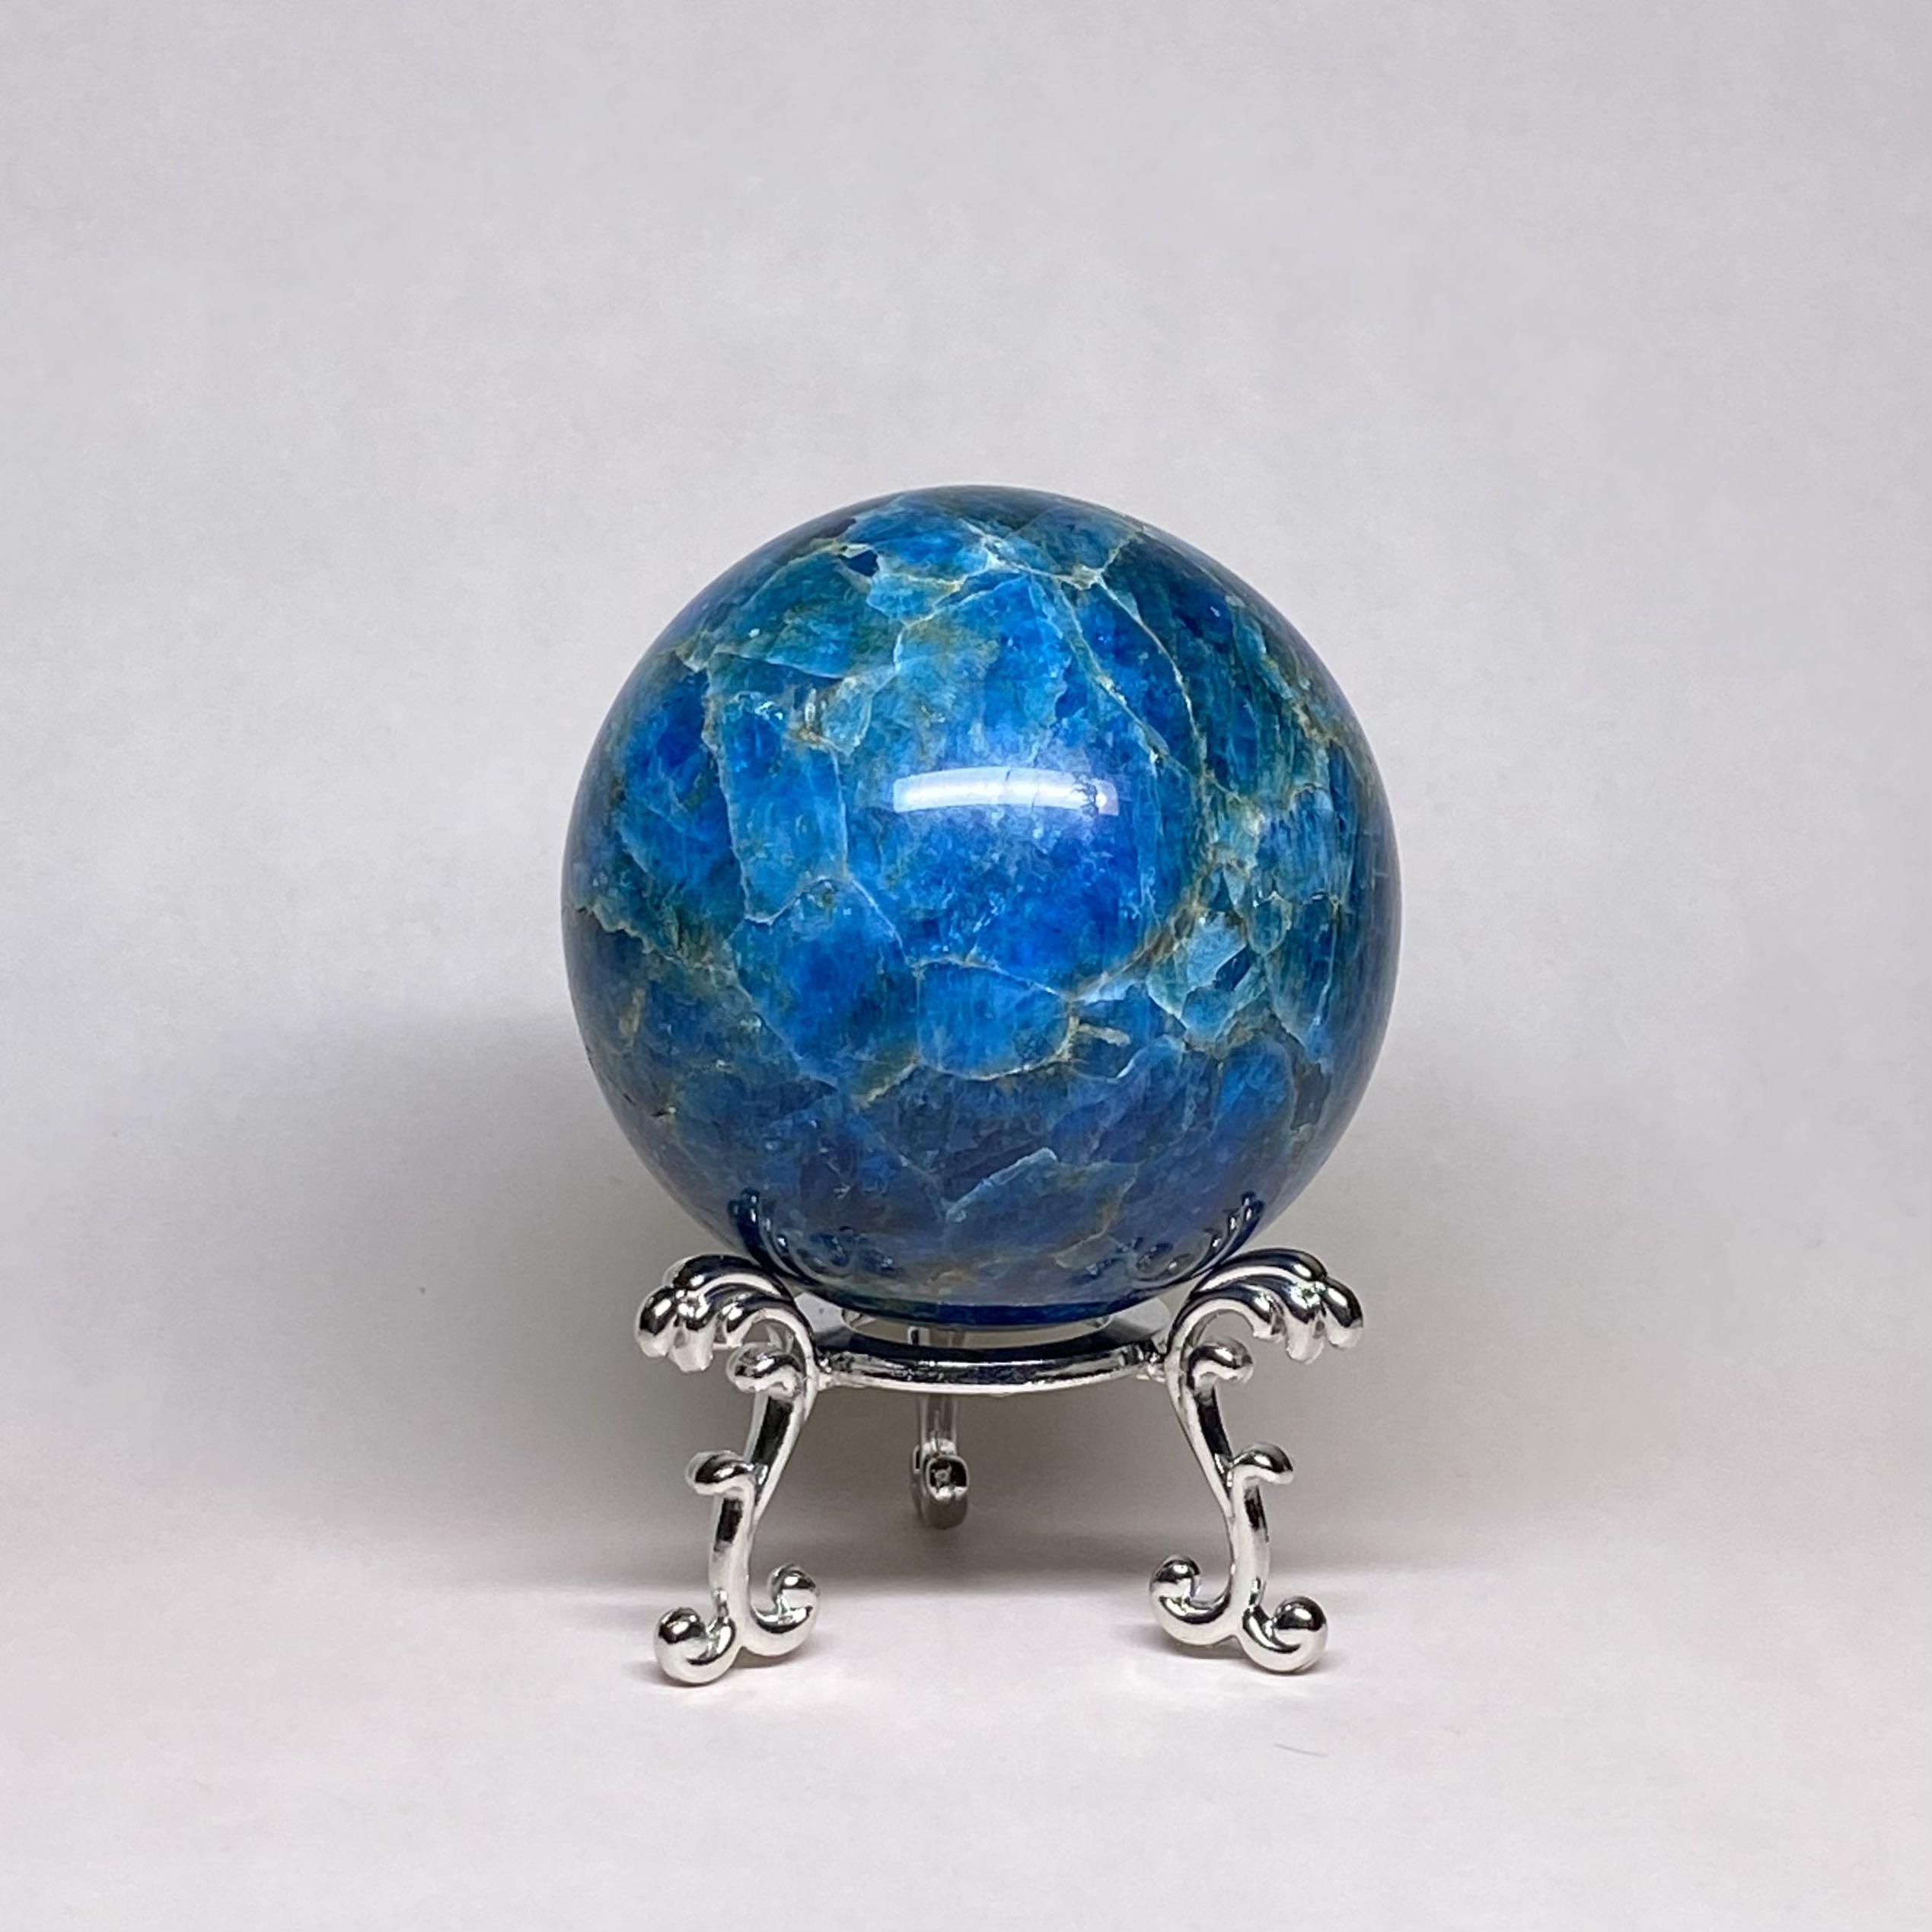 62 mm Blue Apatite Crystal Ball, Hobbies & Toys, Stationery